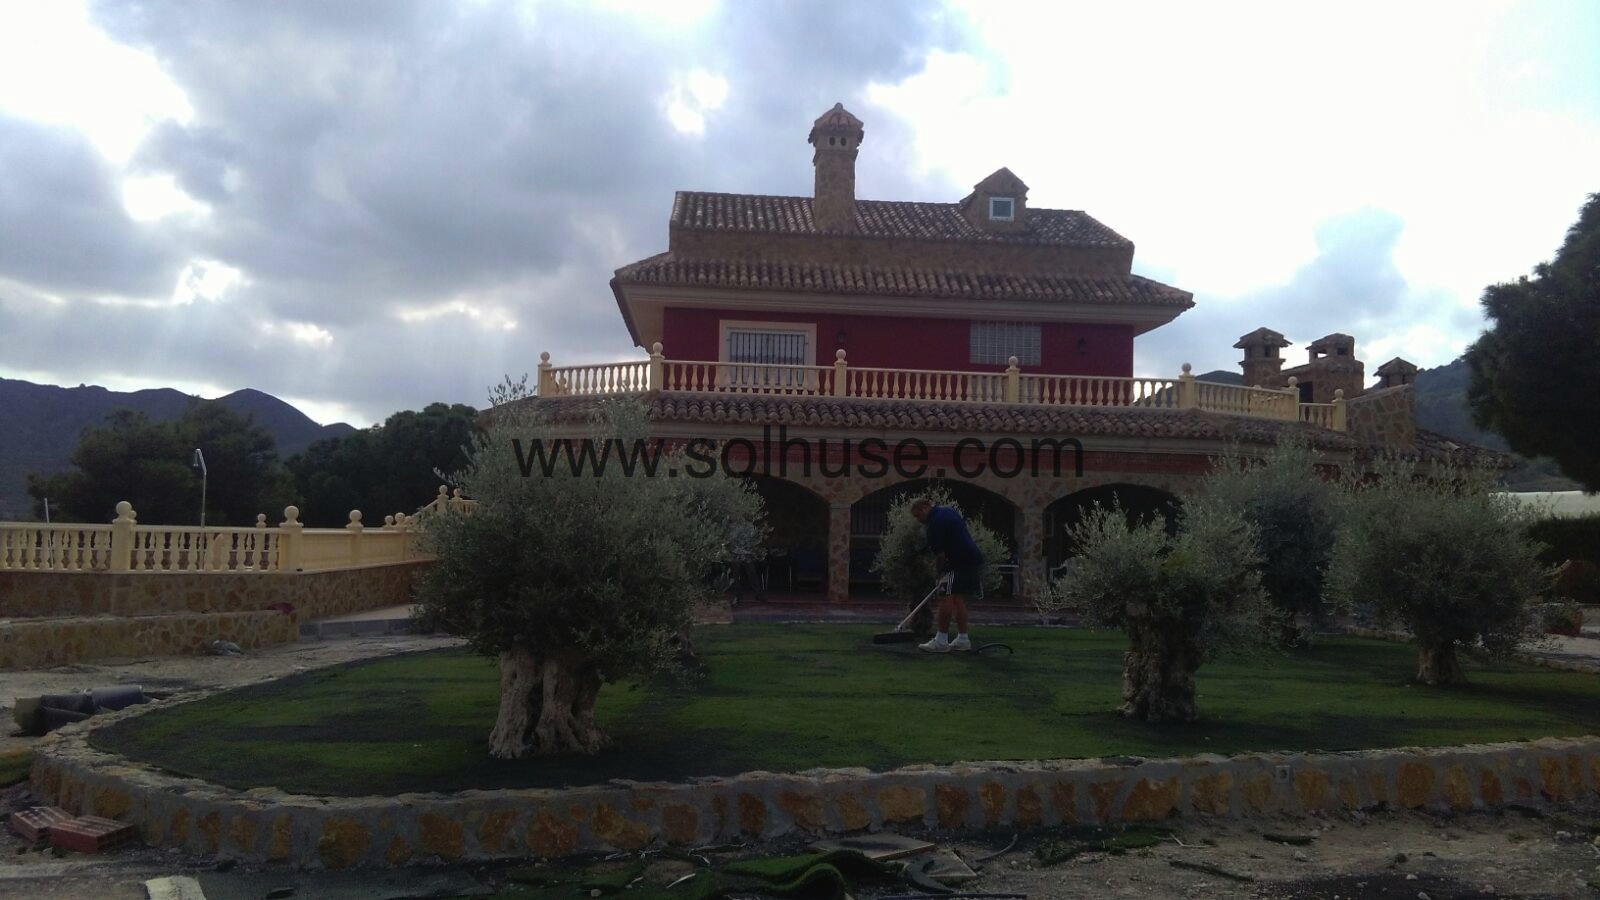 NEW LISTING - LOVELY DETACHED 5 BED, 5 BATH VILLA IN ATALAYA